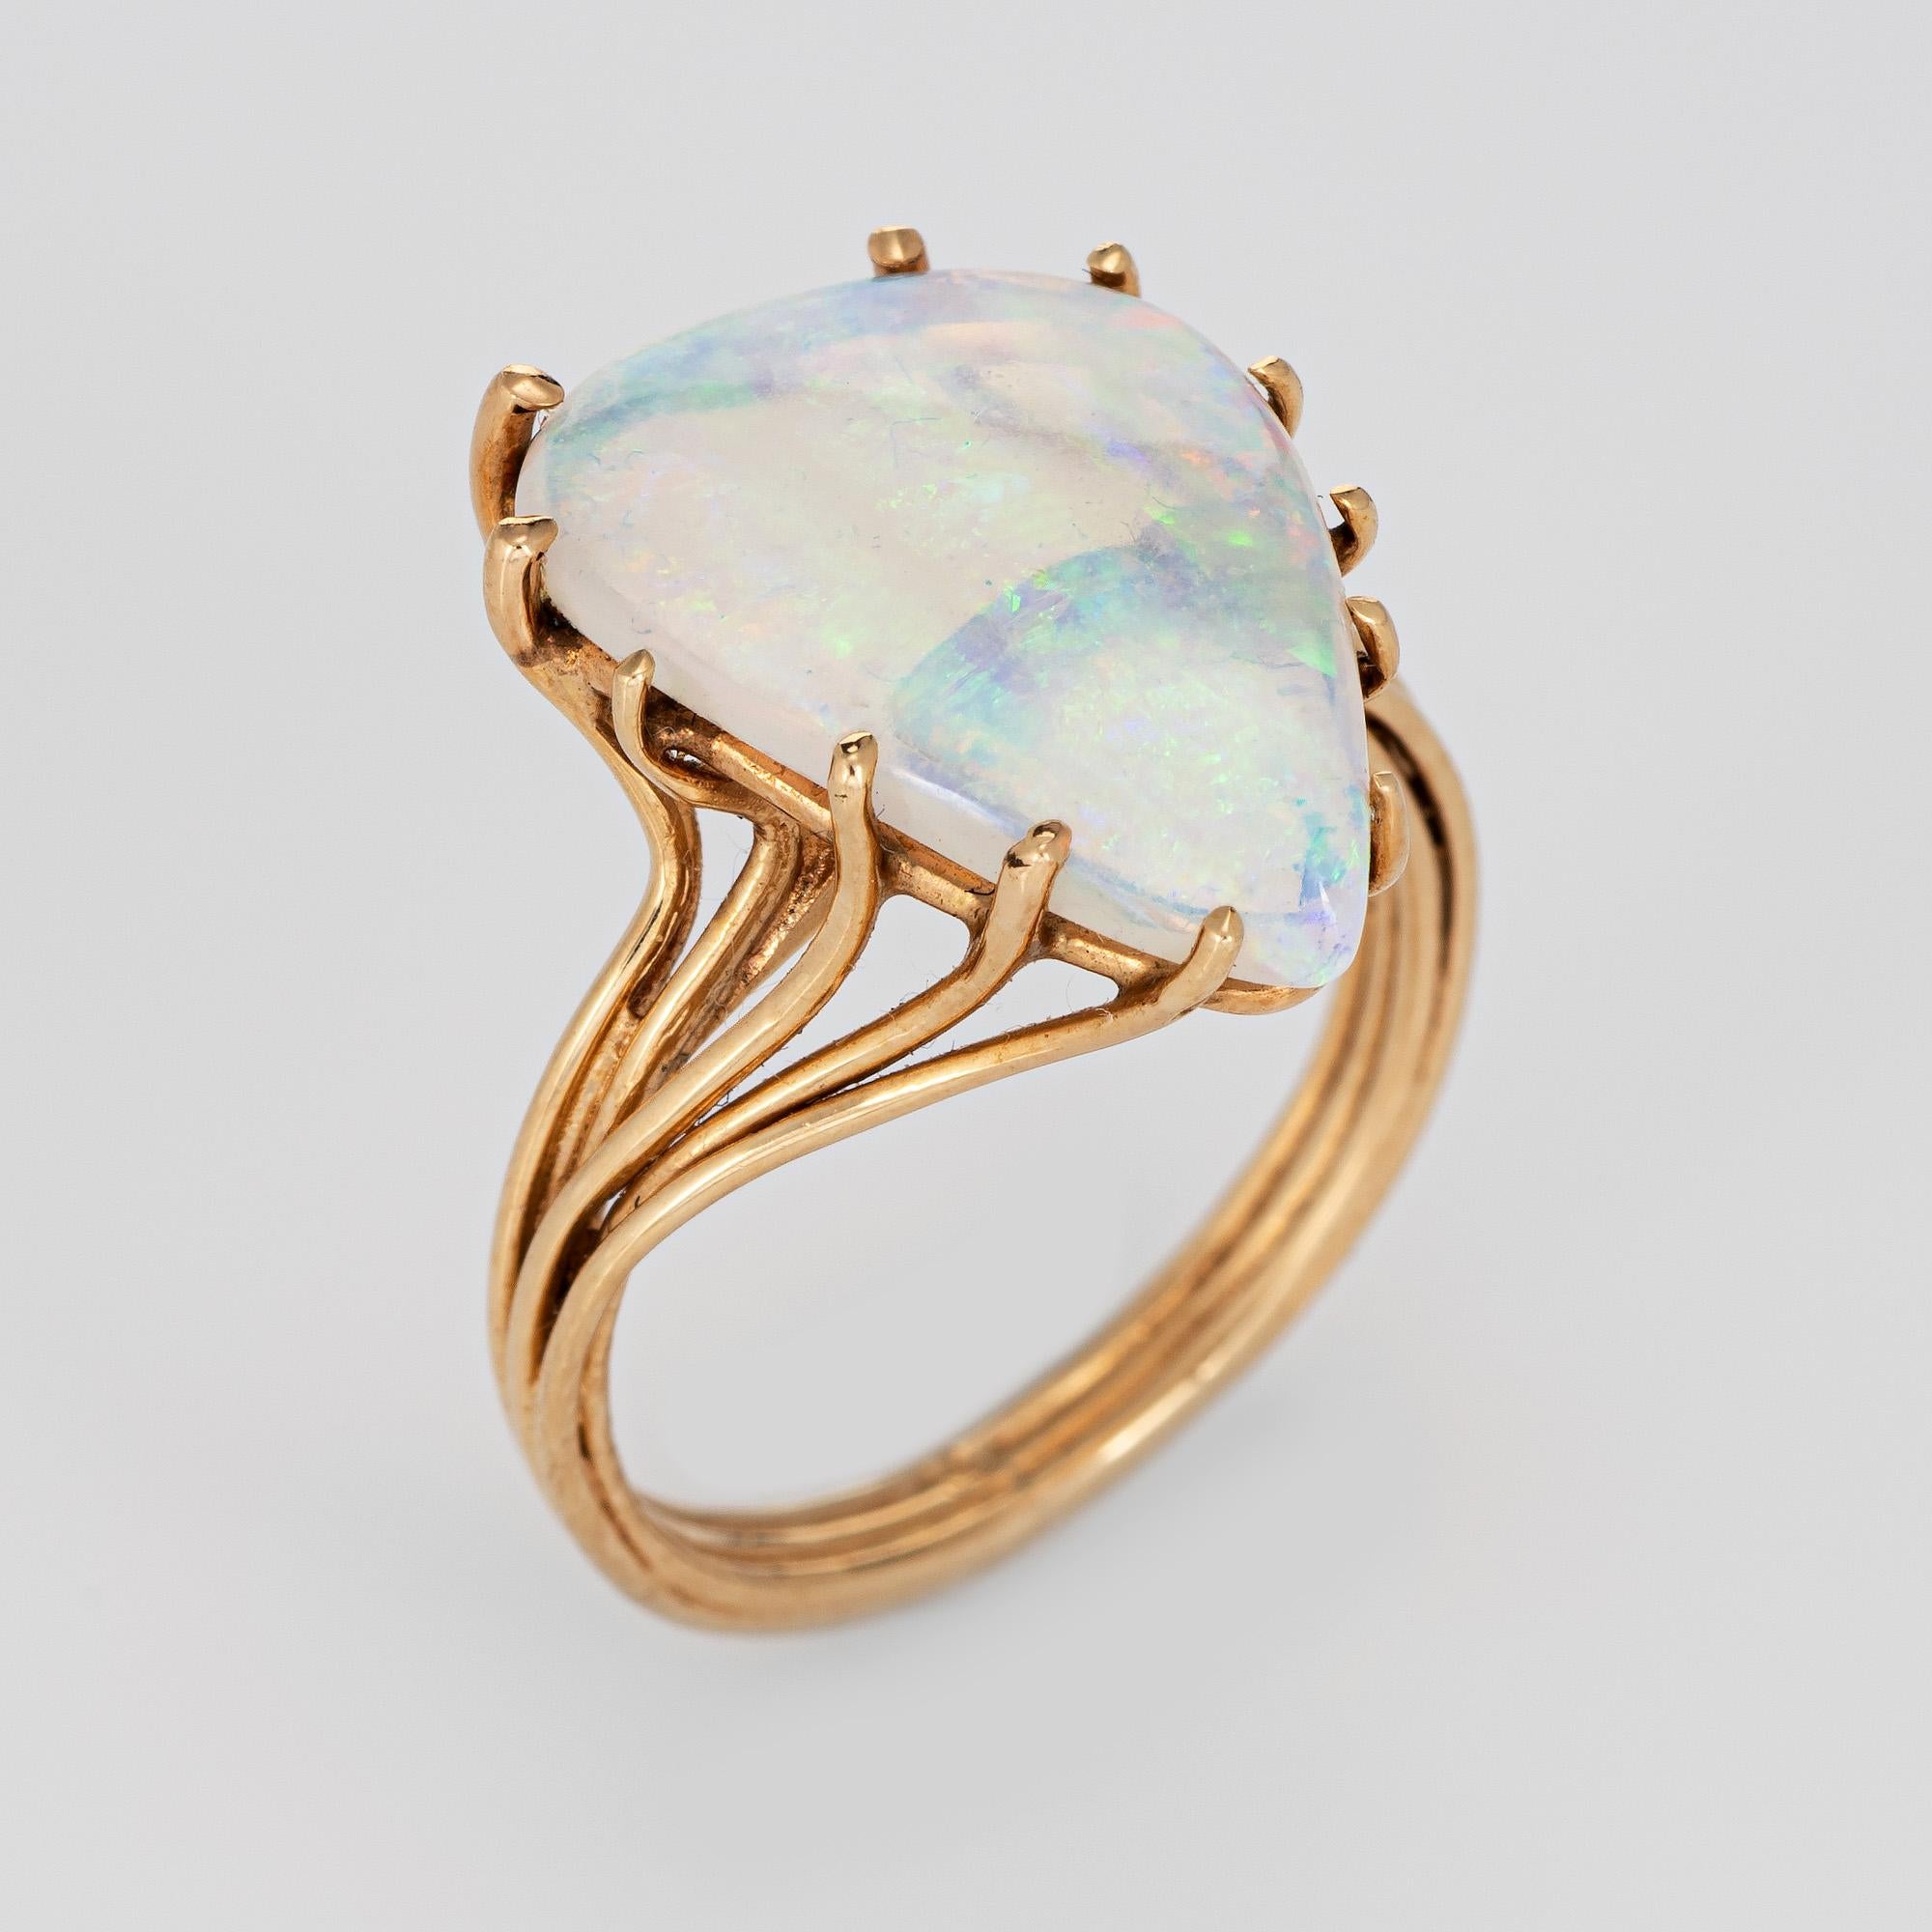 Stylish vintage natural crystal opal ring (circa 1970s to 1980s) crafted in 14 karat yellow gold. 

Natural crystal opal measures 16.5mm x 12mm (estimated at 3.50 carats). The opal is in excellent condition and free of cracks or chips. 

The crystal